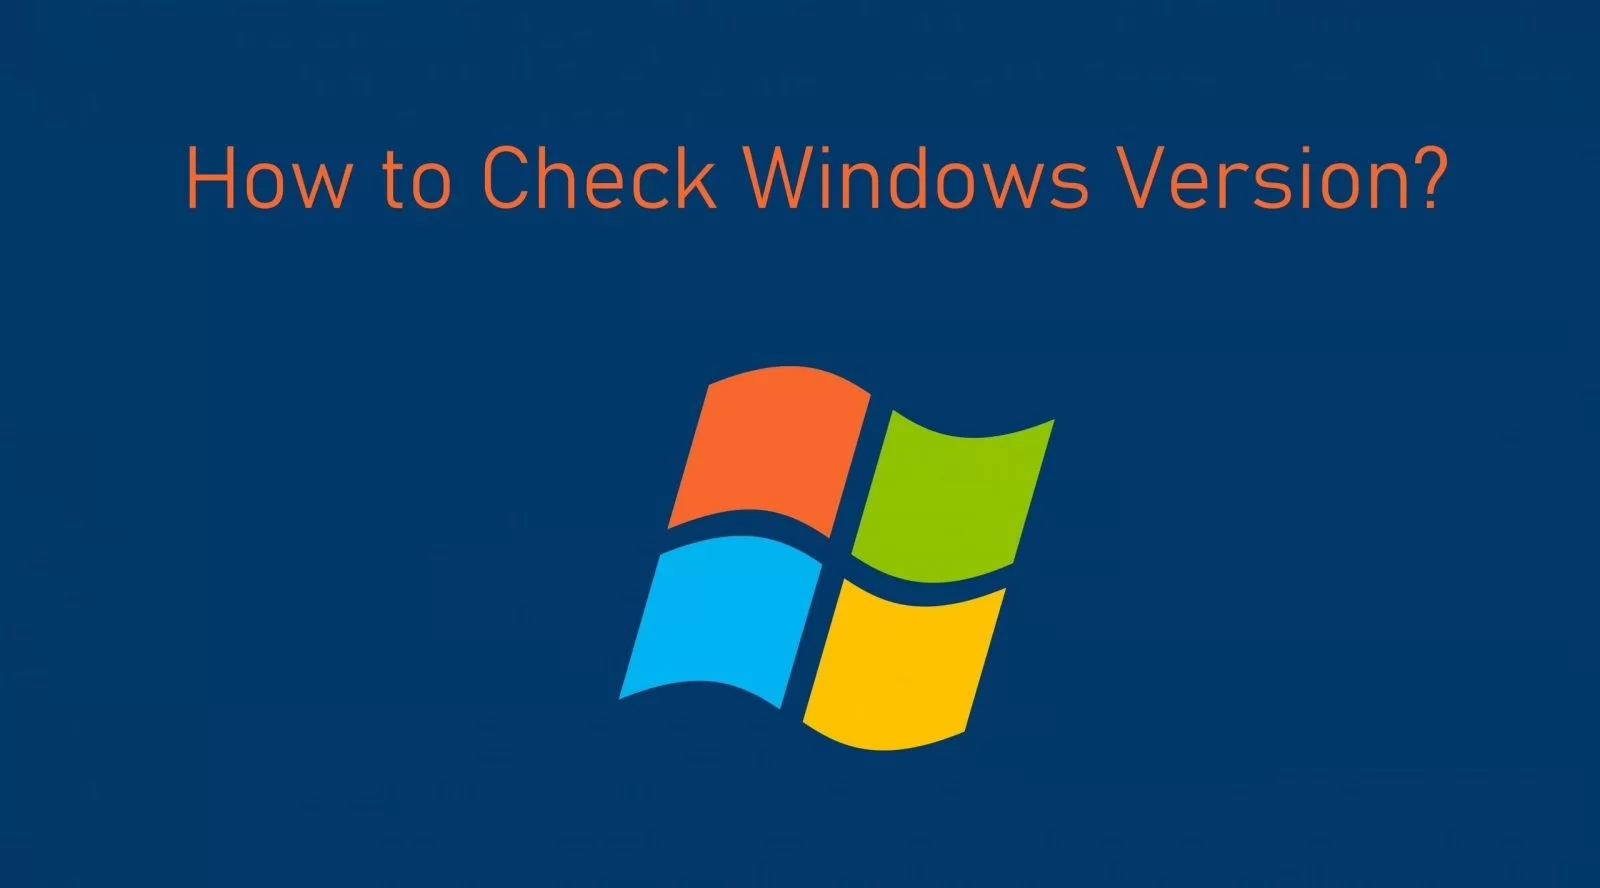 How to check Windows version